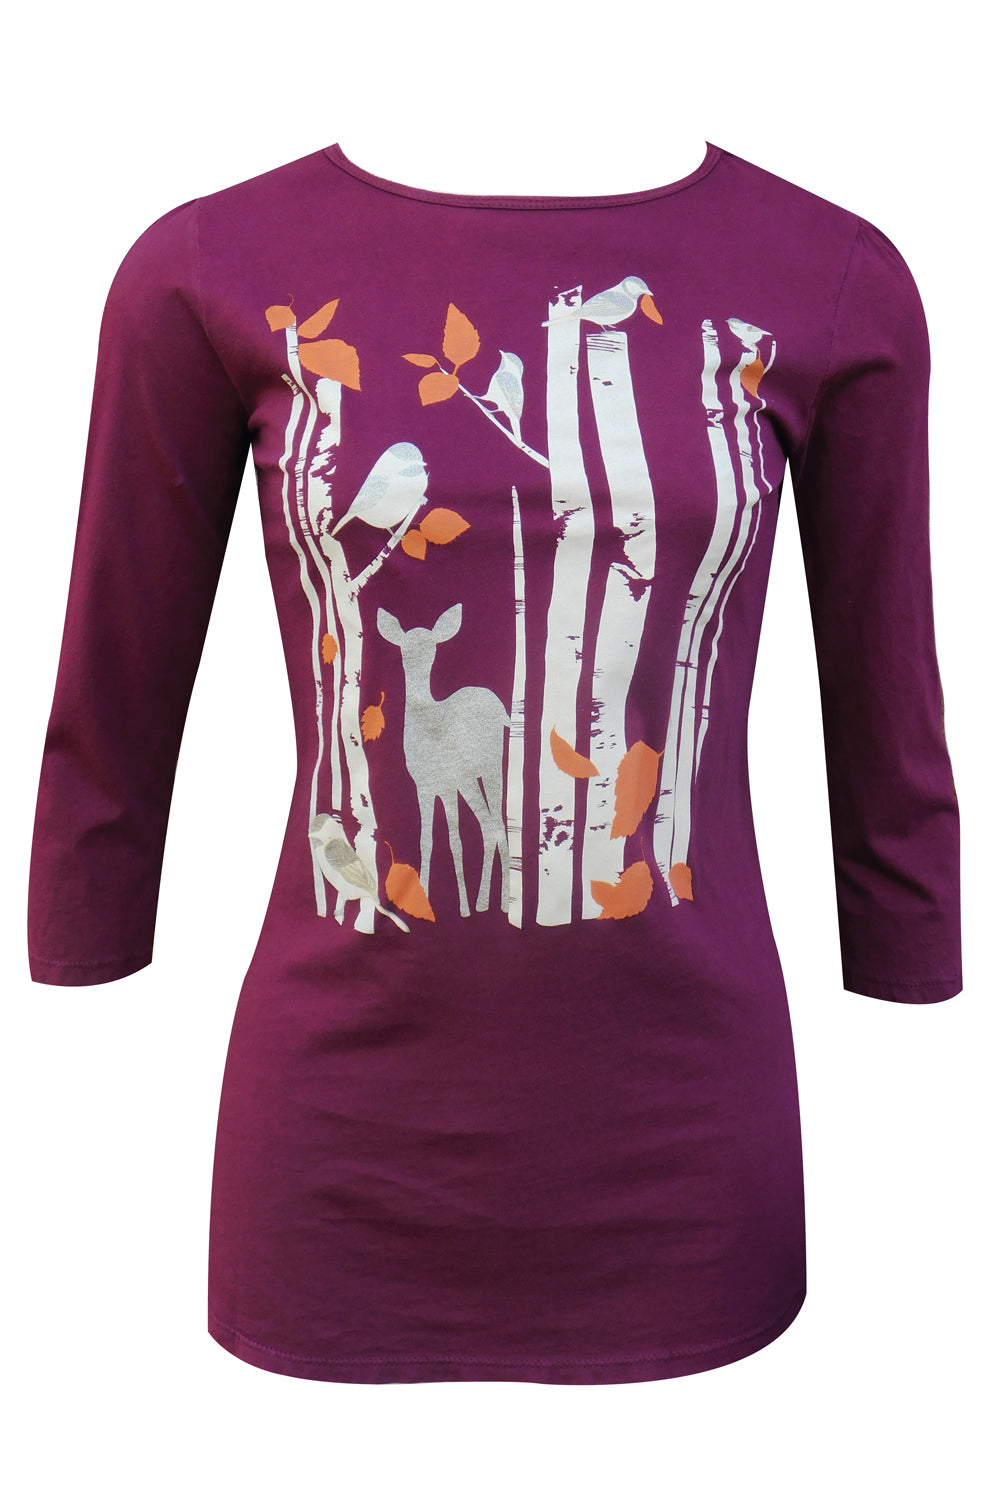 T-shirt featuring deer, birch tree and leaf print